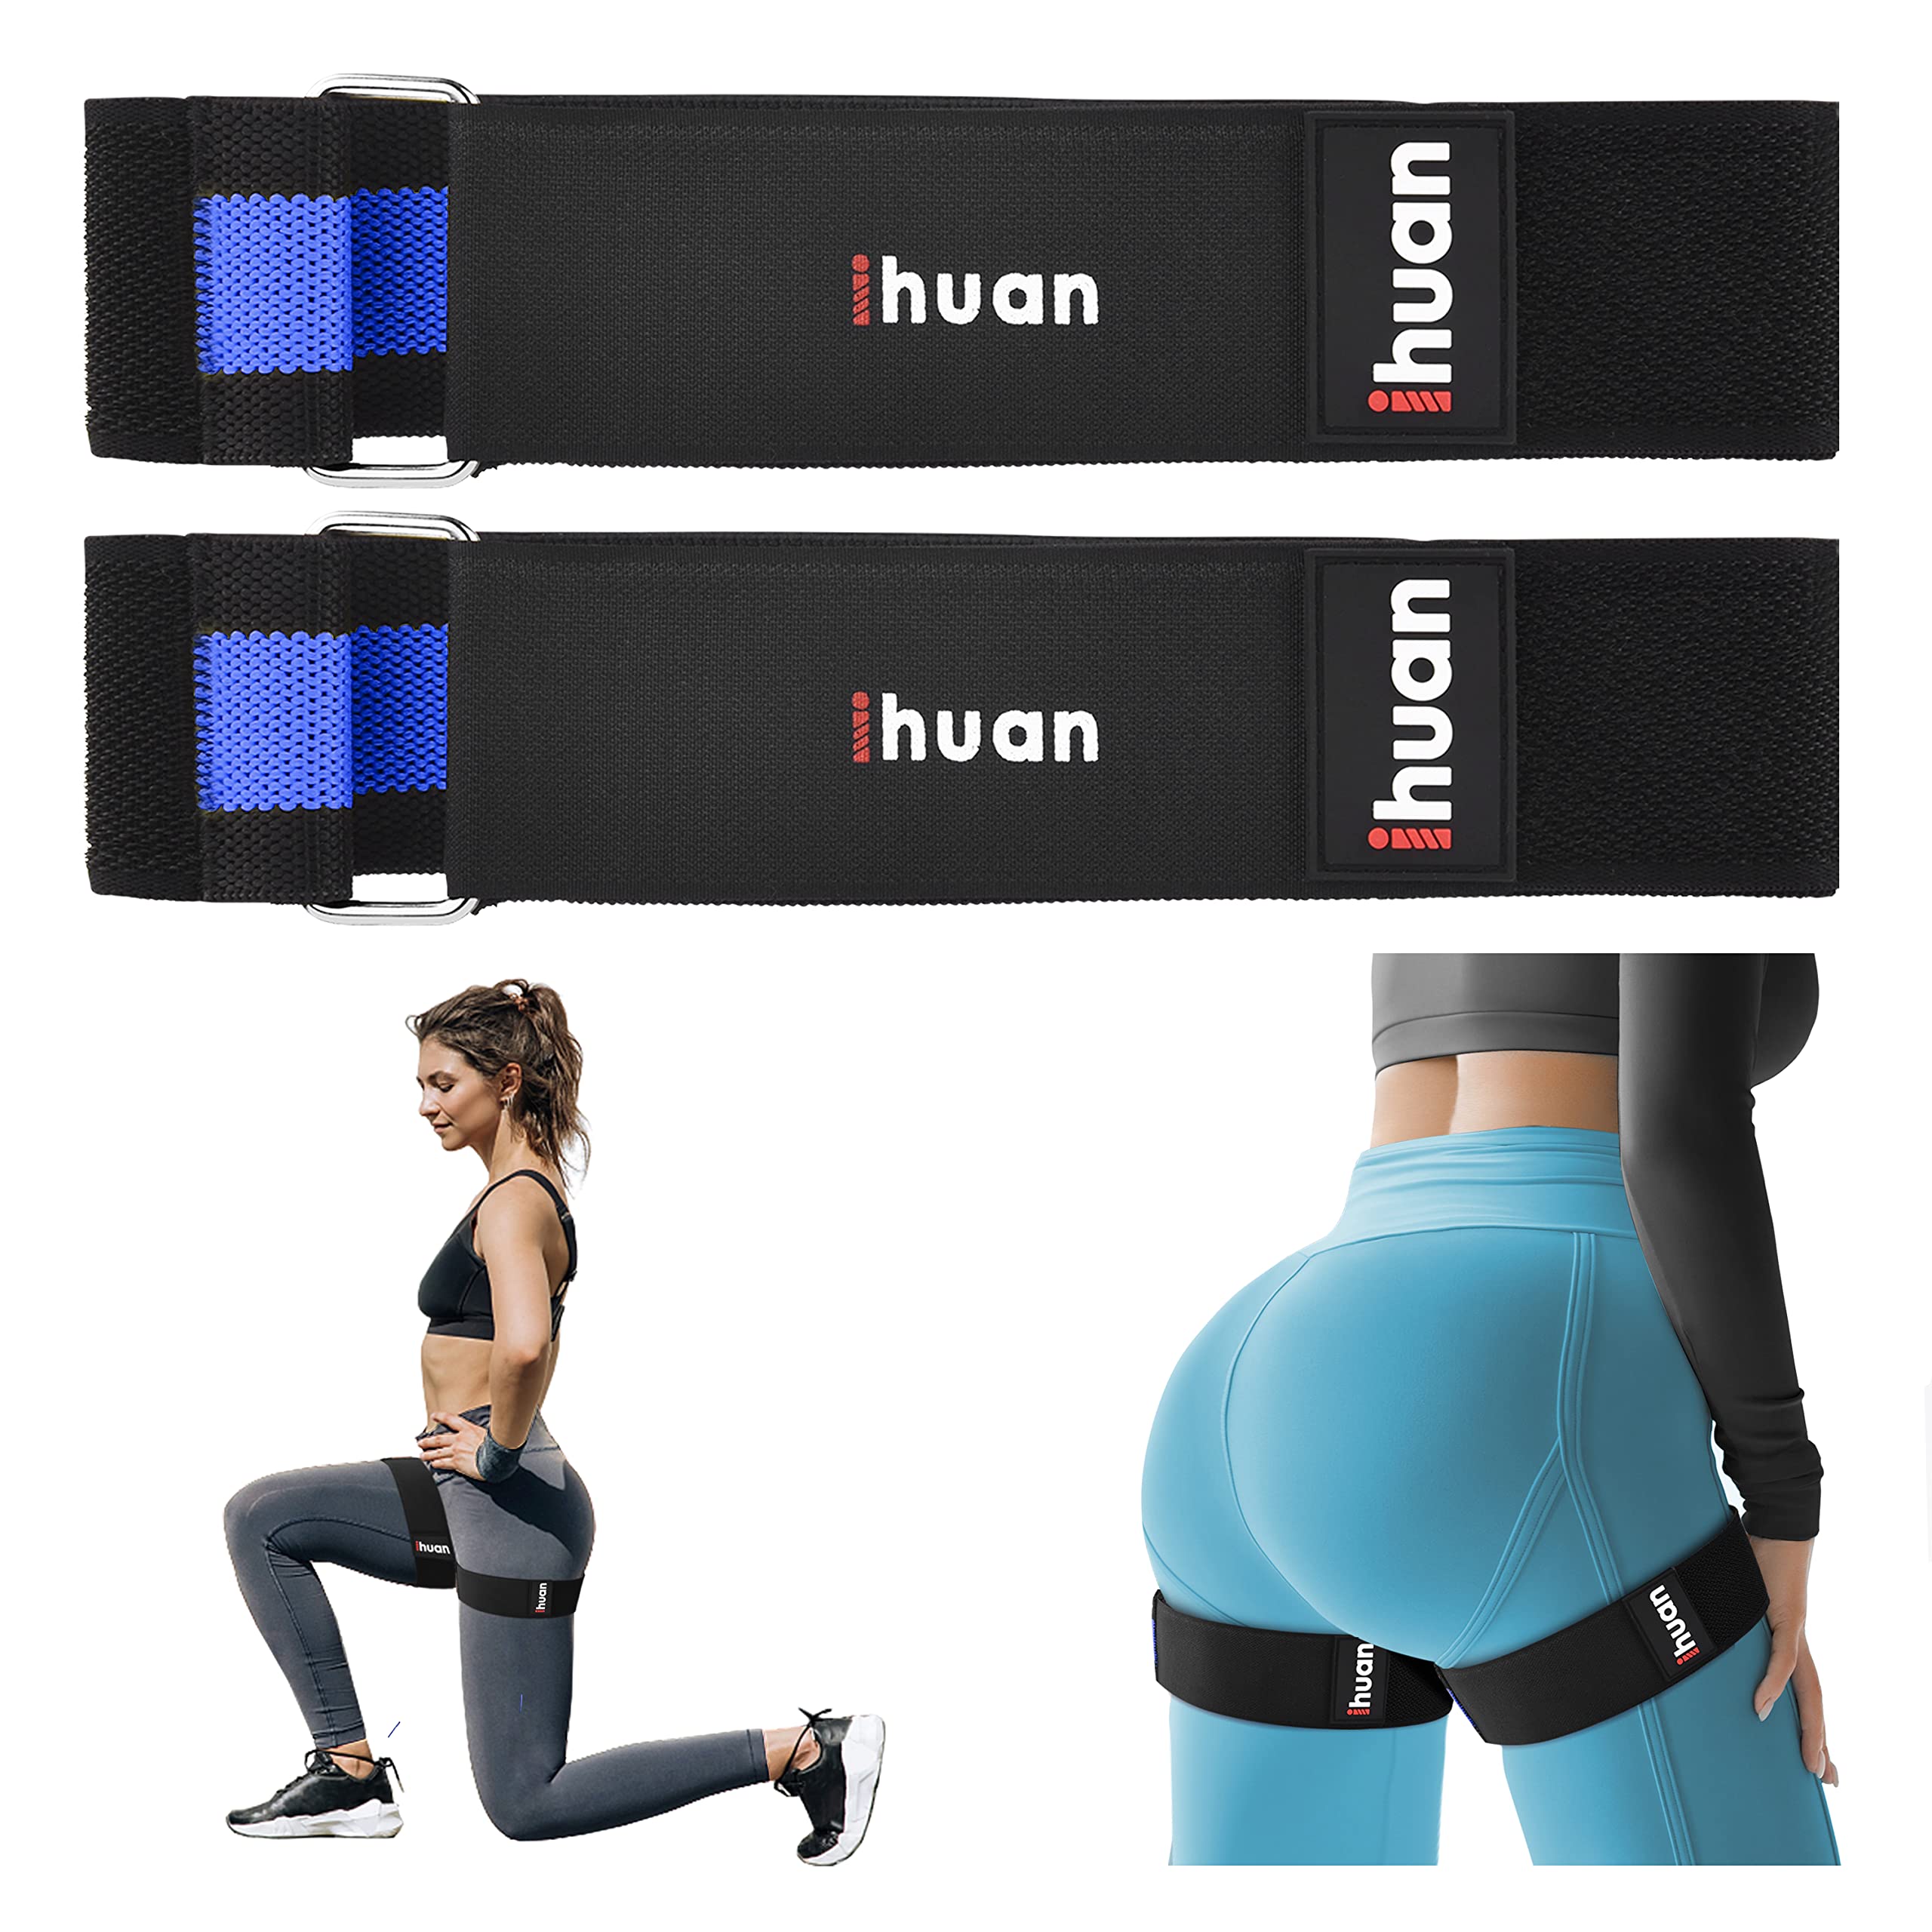  PRITI FIT BFR Booty Bands for Women-Includes 8 Week Guide for  Legs, Glutes&Hip Building, Blood Flow Restriction Occlusion Workouts,Best  Fabric Resistance Loop,Tone&Lift Your Butt,Squat,Thigh,Fitness : Sports &  Outdoors